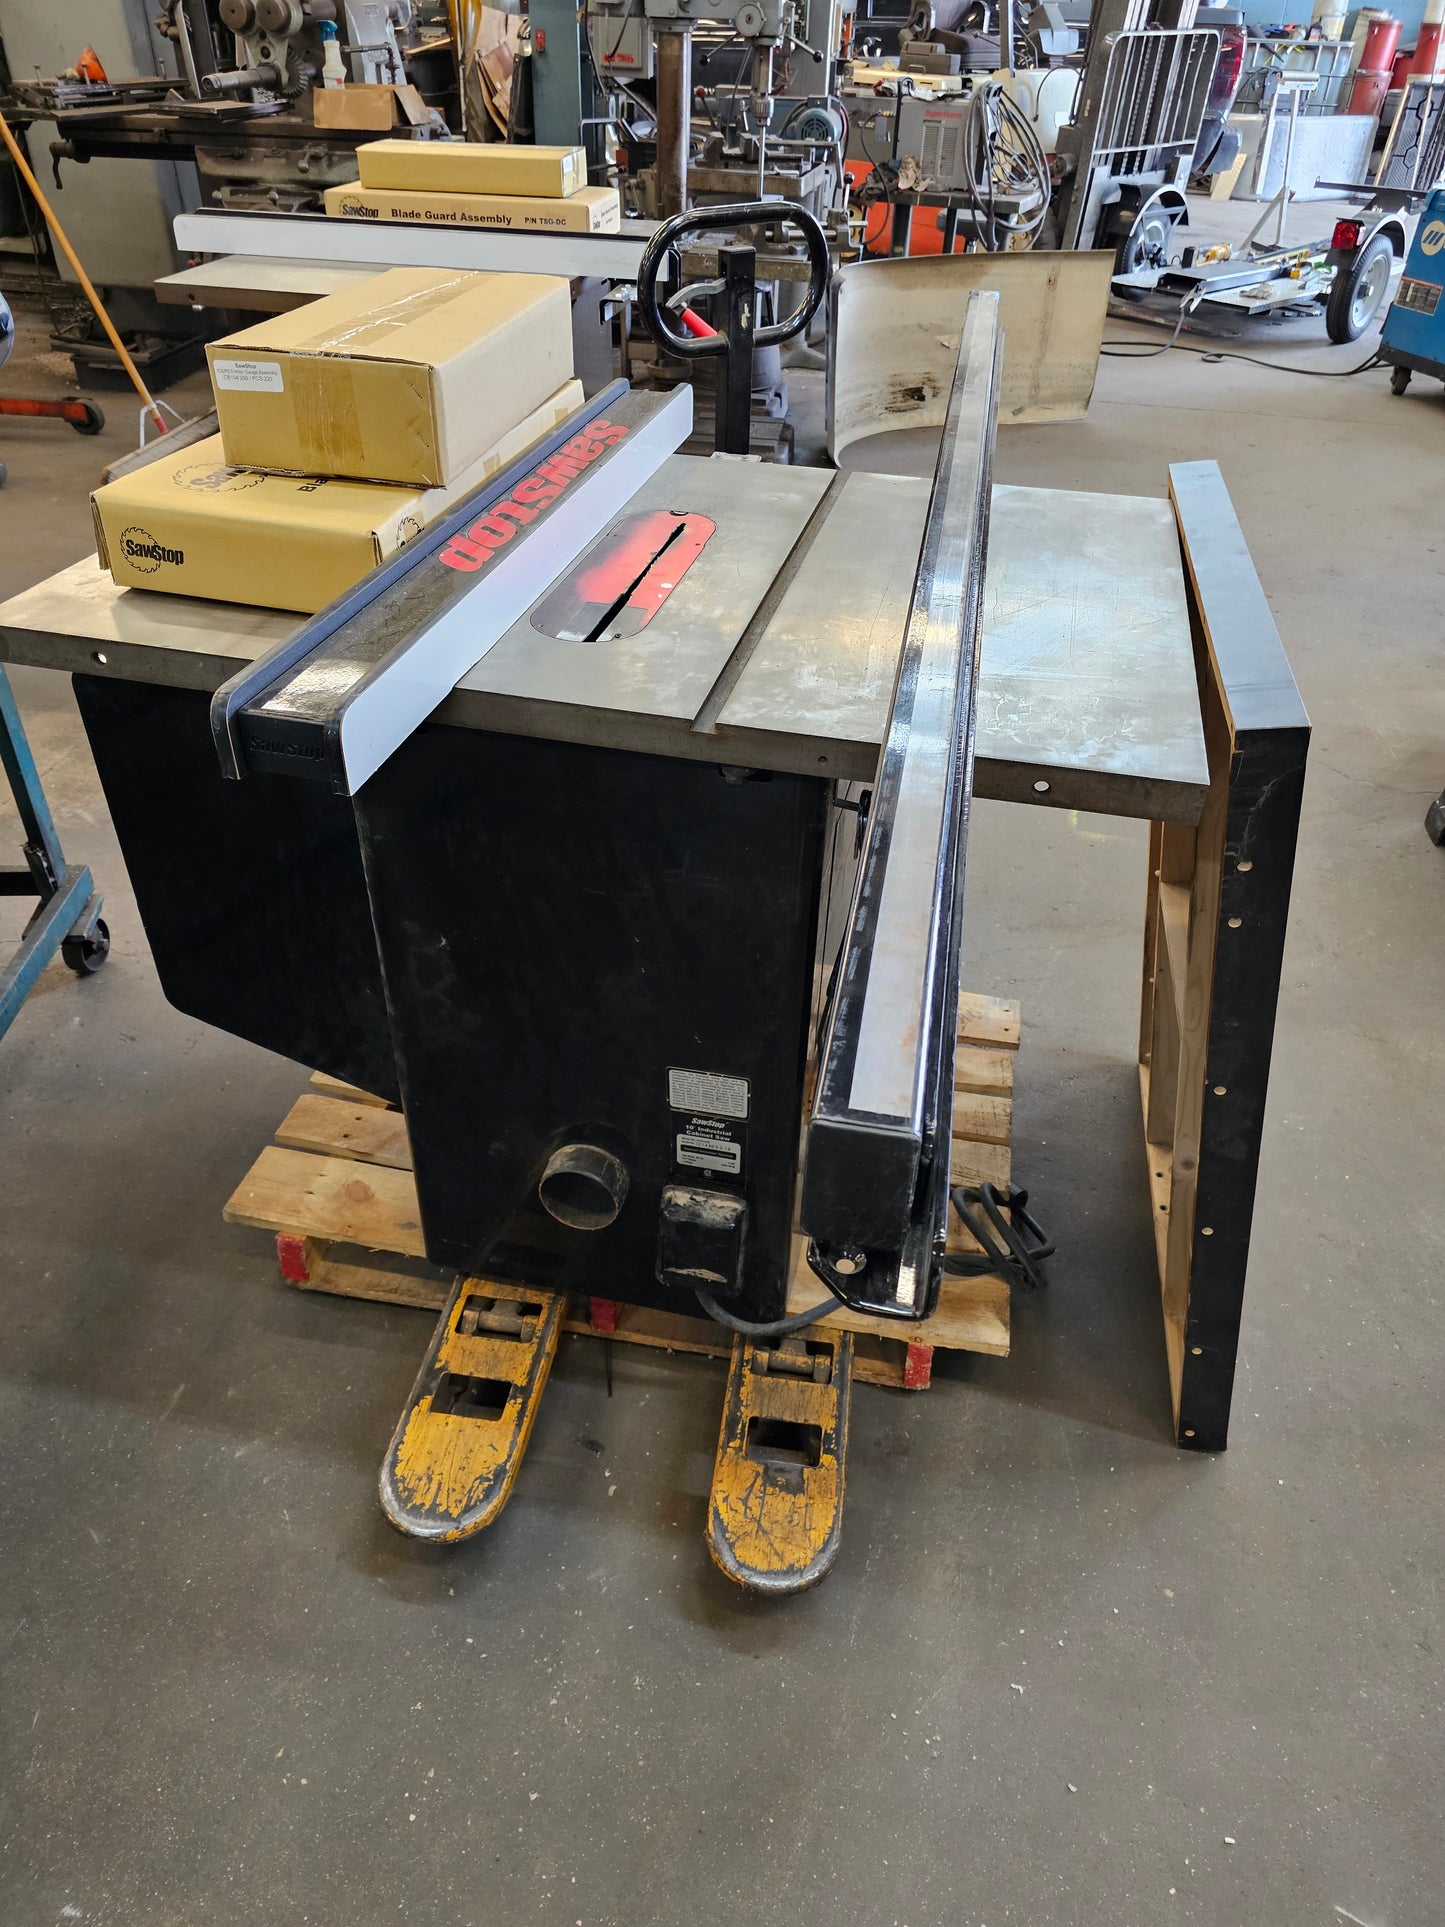 SawStop 10" Industrial Cabinet Saw (Saw 1 of 2) - Illinois